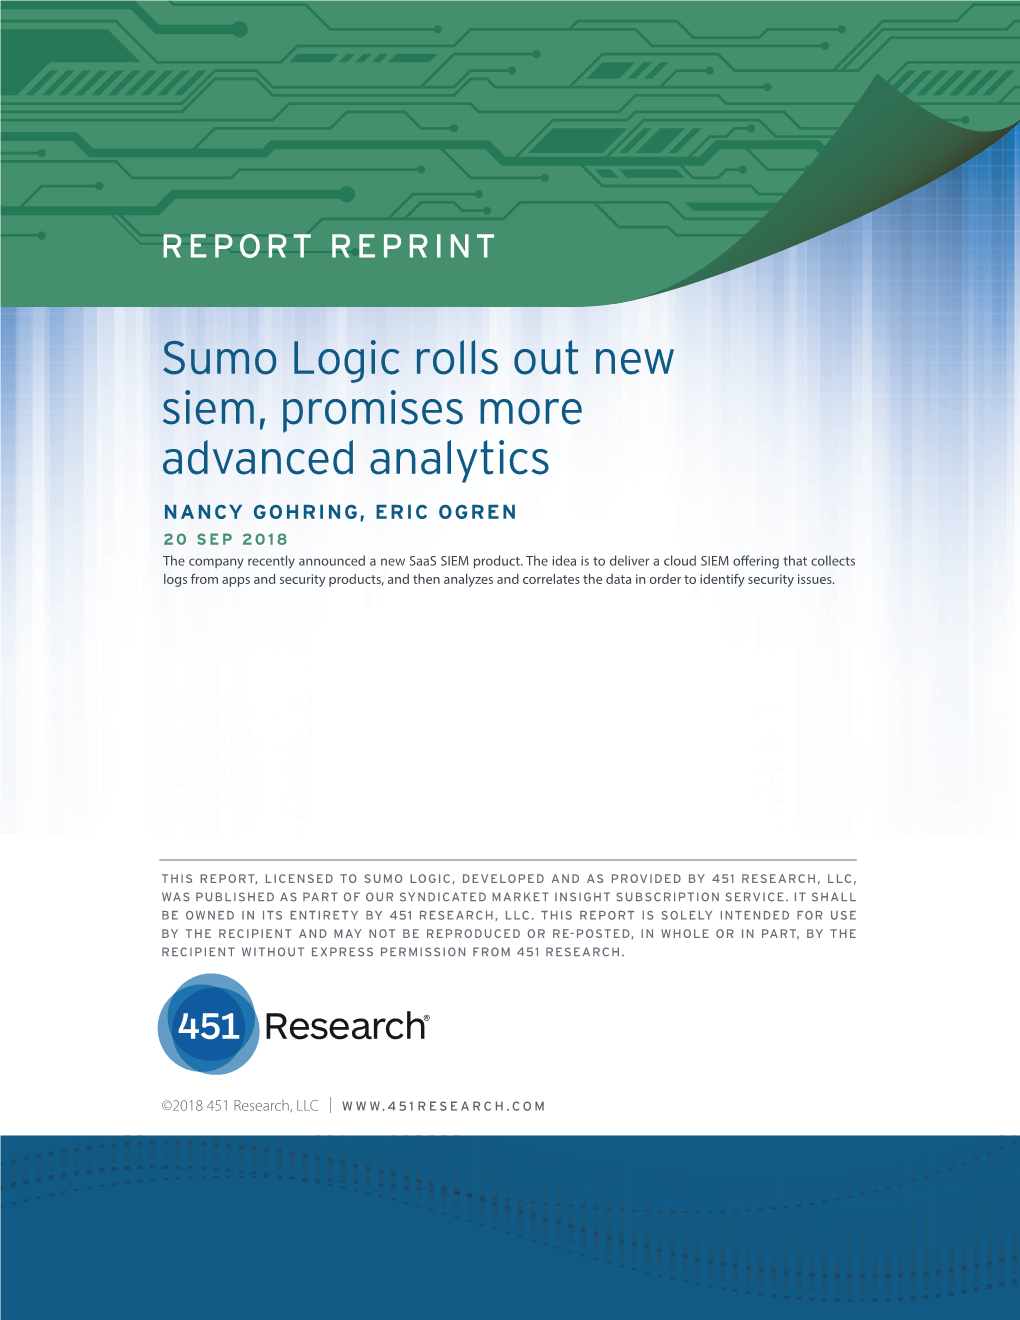 Sumo Logic Rolls out New Siem, Promises More Advanced Analytics NANCY GOHRING, ERIC OGREN 20 SEP 2018 the Company Recently Announced a New Saas SIEM Product